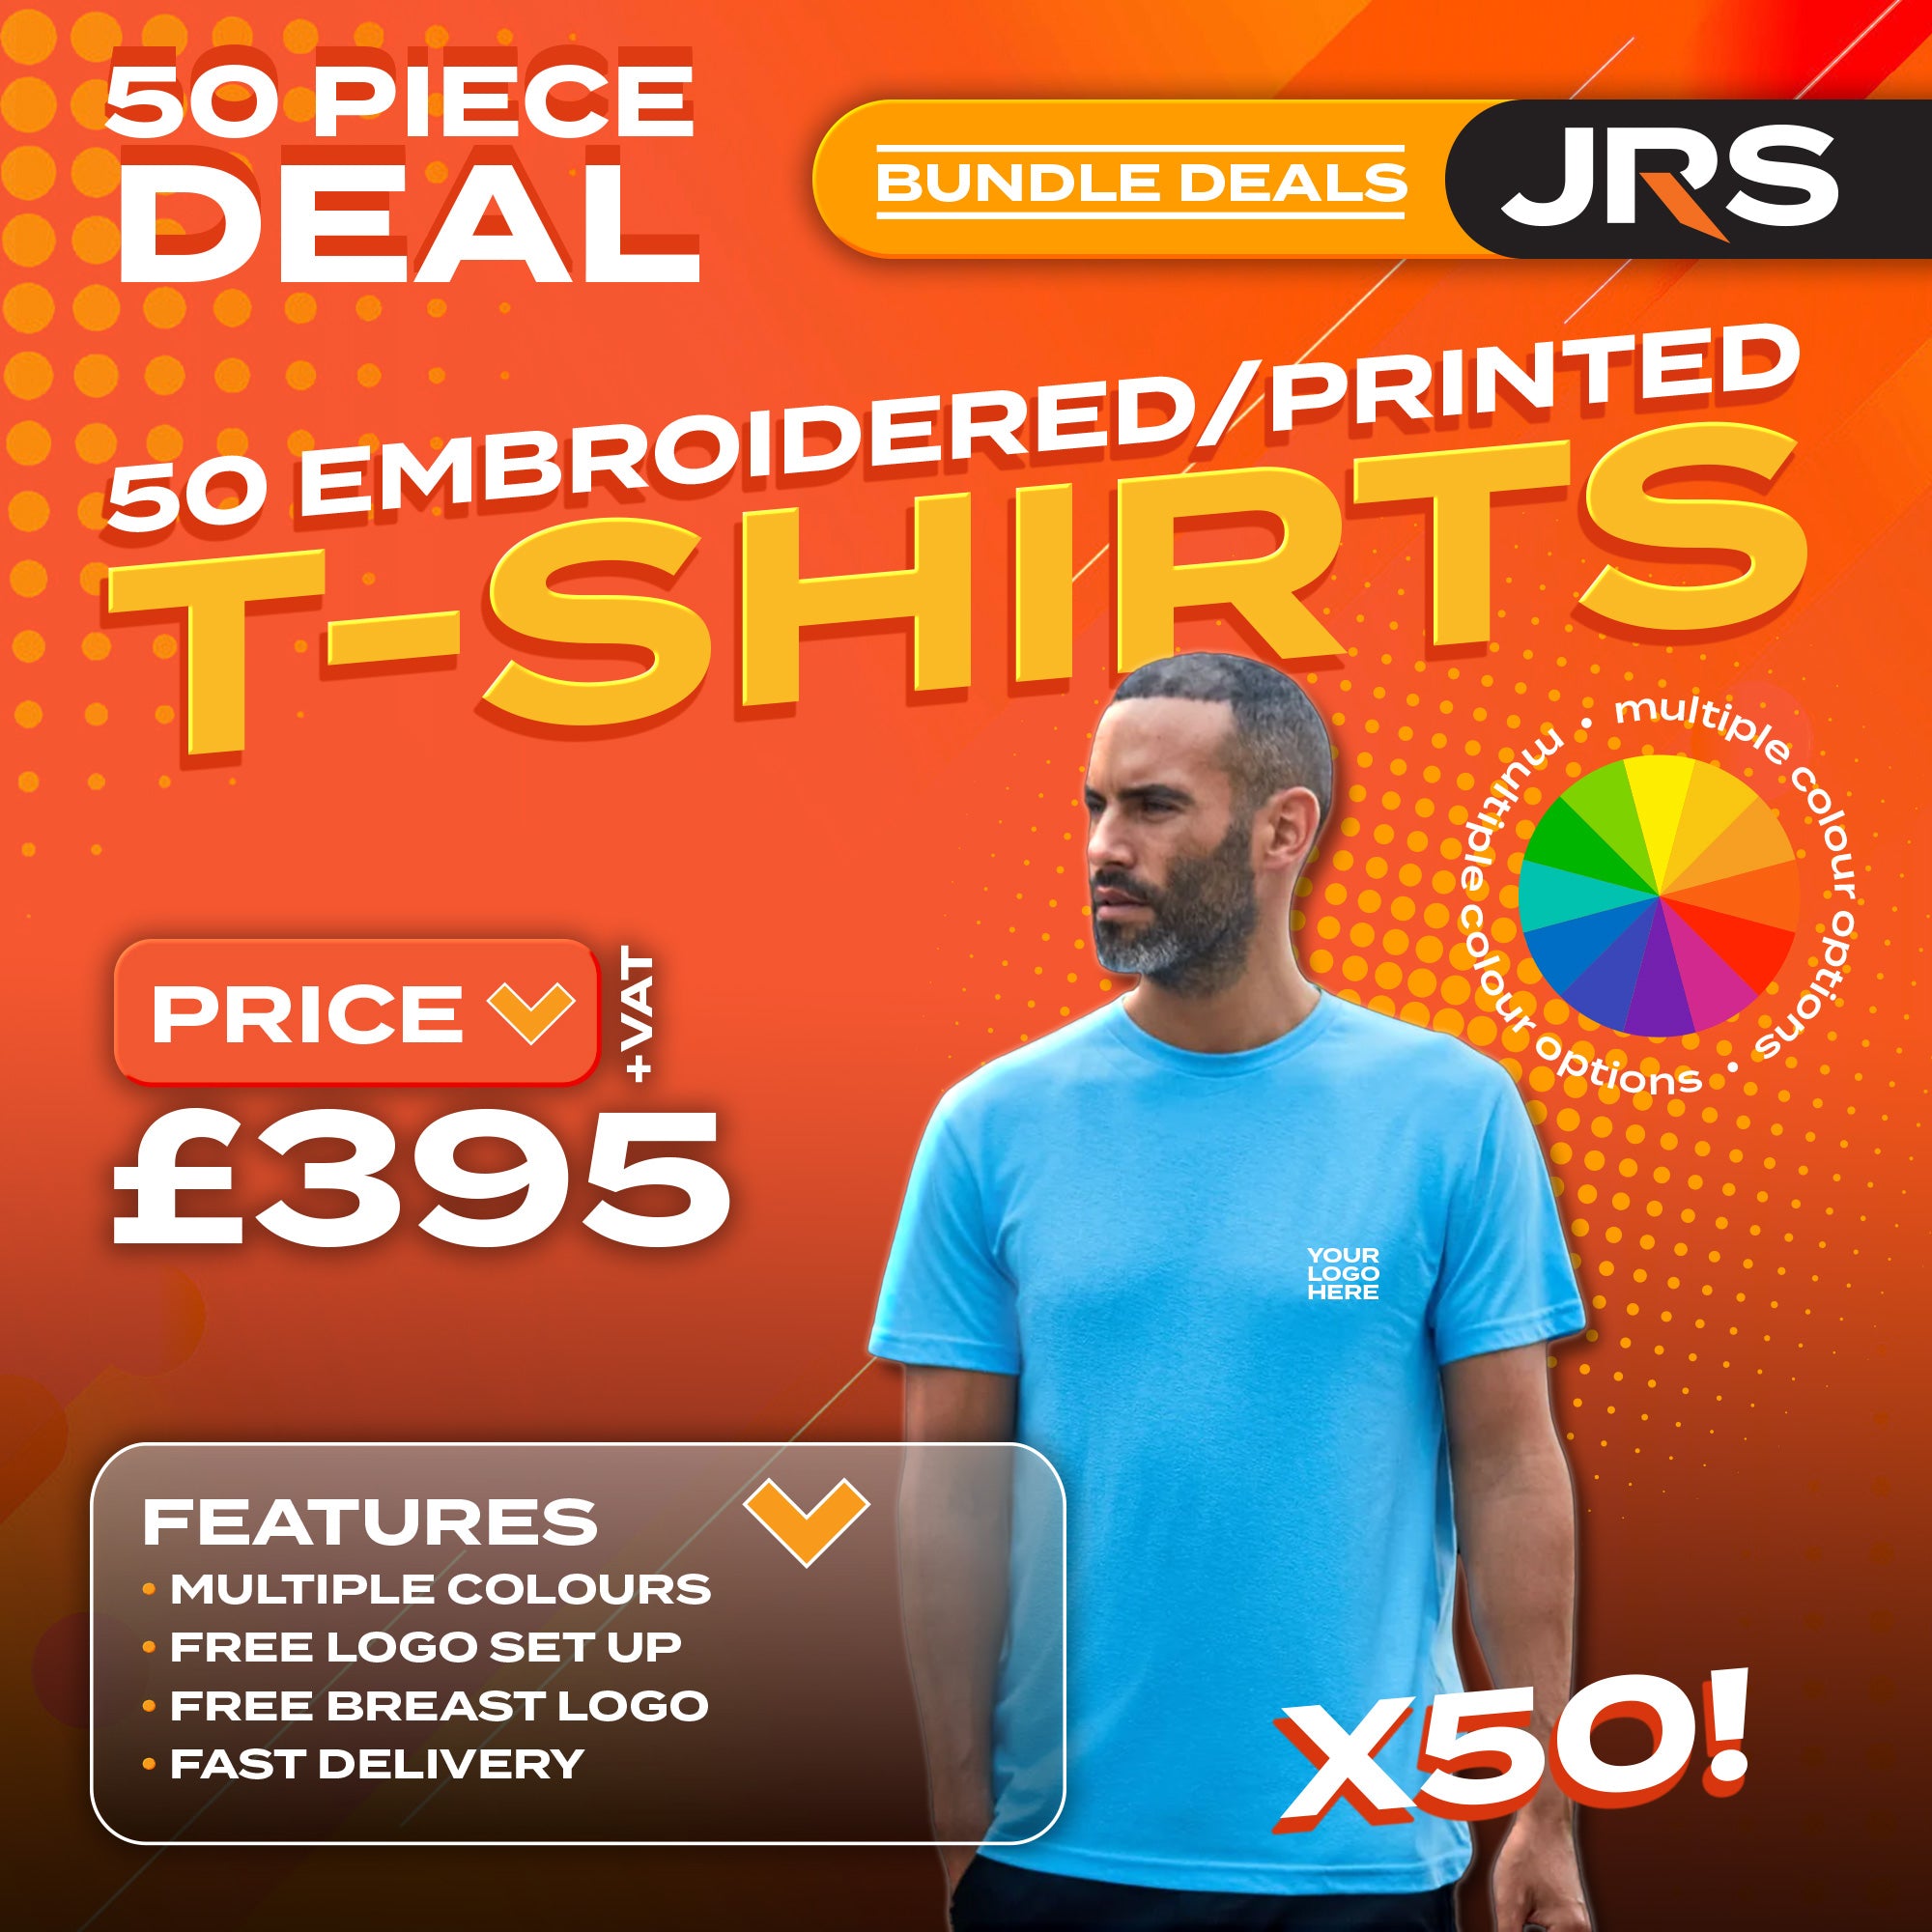 50 Personalised Embroidered/Printed Work T-Shirts with Free Logo